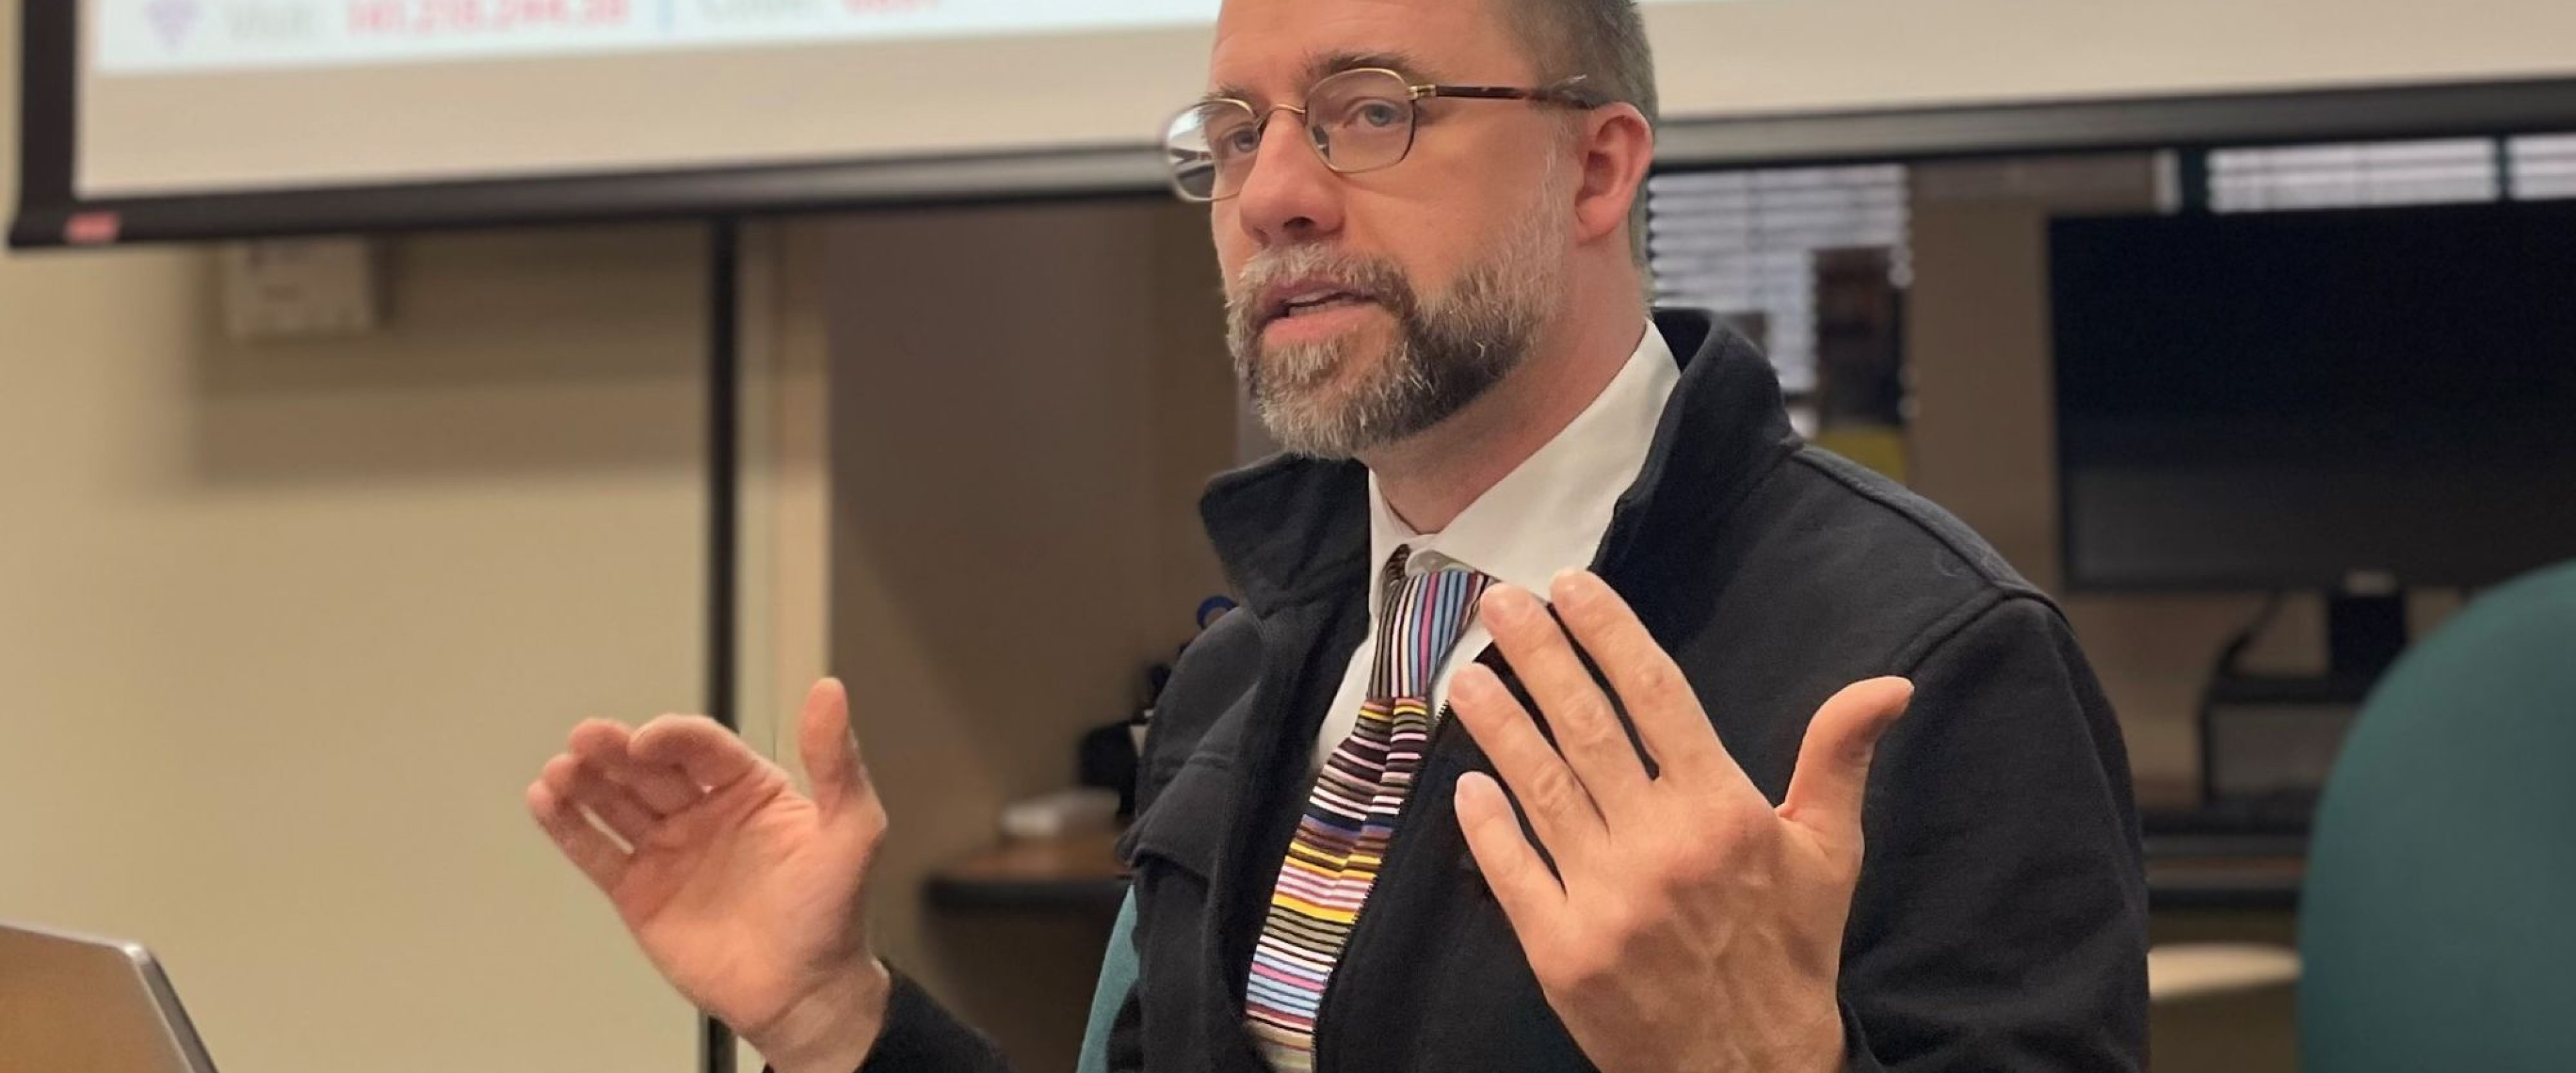 Dr. Lofty Durham, wearing glasses, a dark jacket, and a multi-colored striped tie, speaks in front of a screen that reads "Medieval Institute Teaching Series 2023"